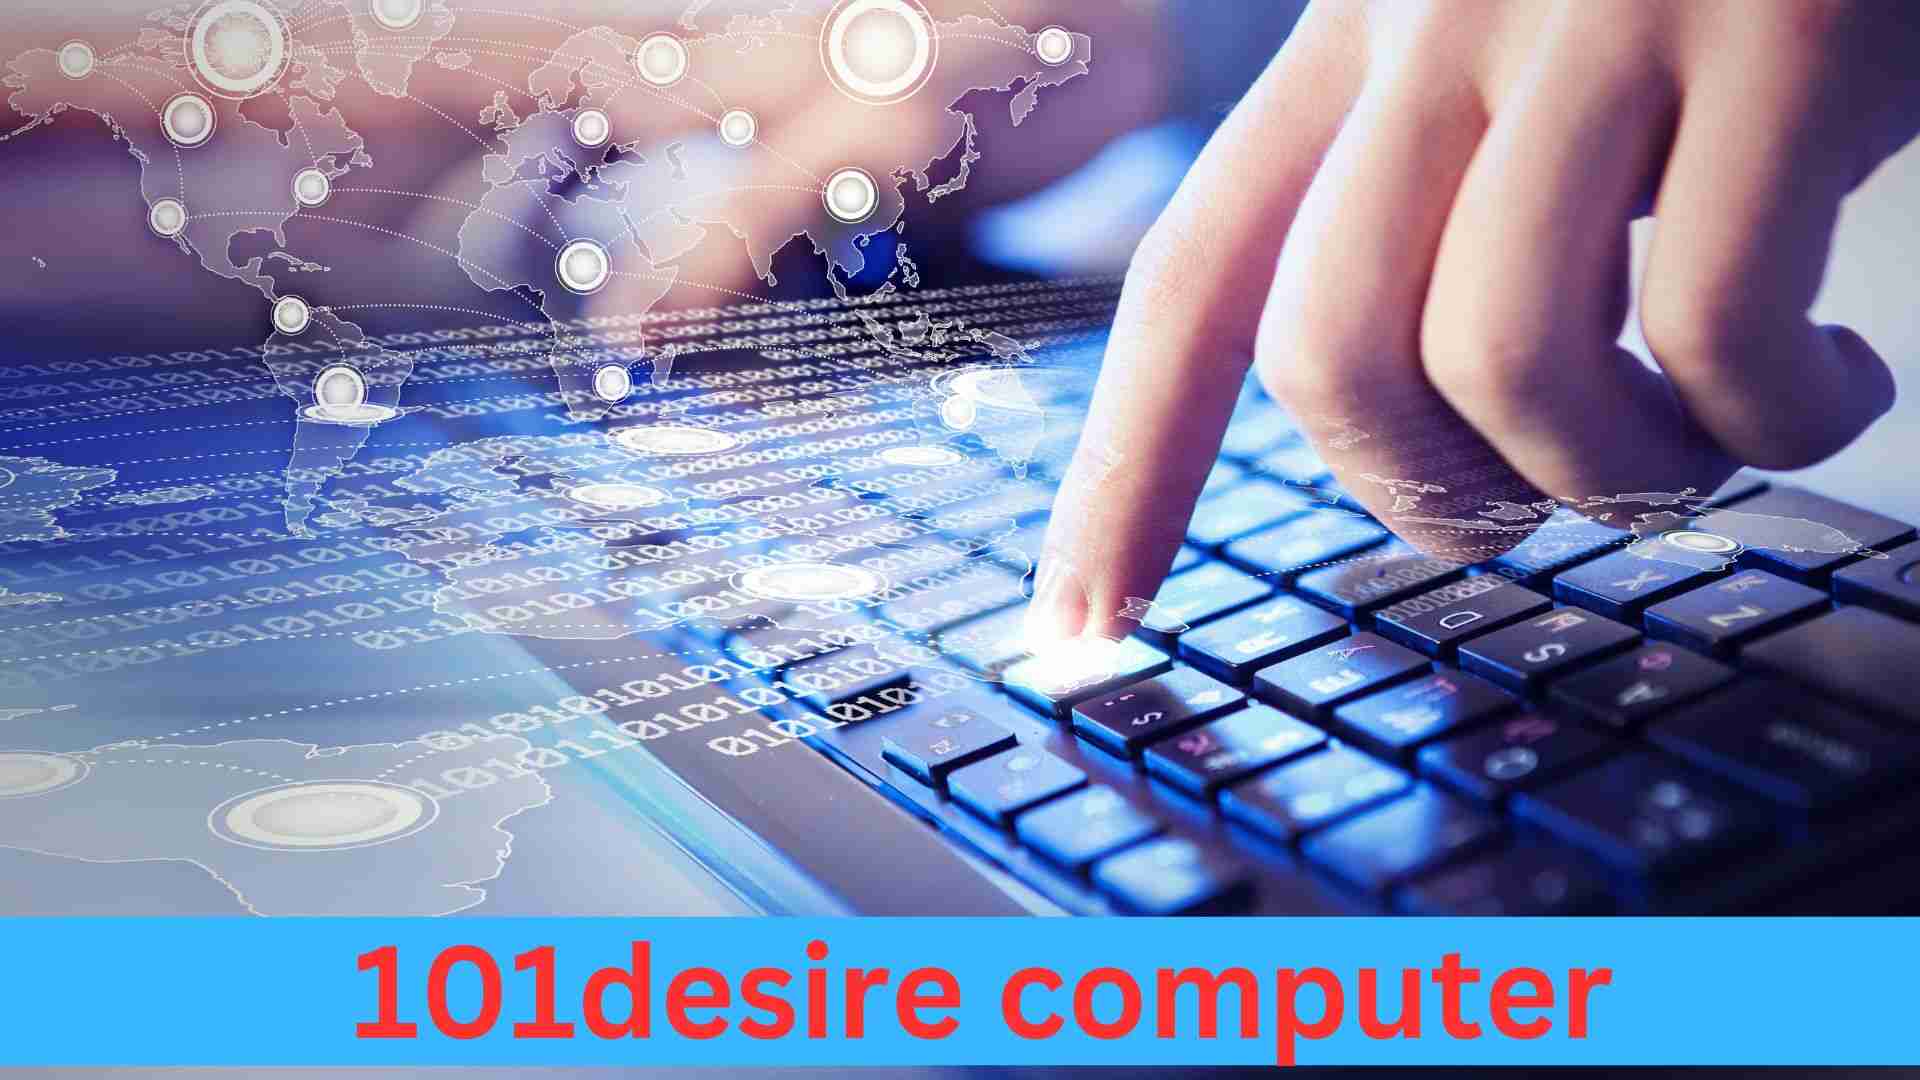 101desire computer health and beauty: A Platform for life-changing aspects